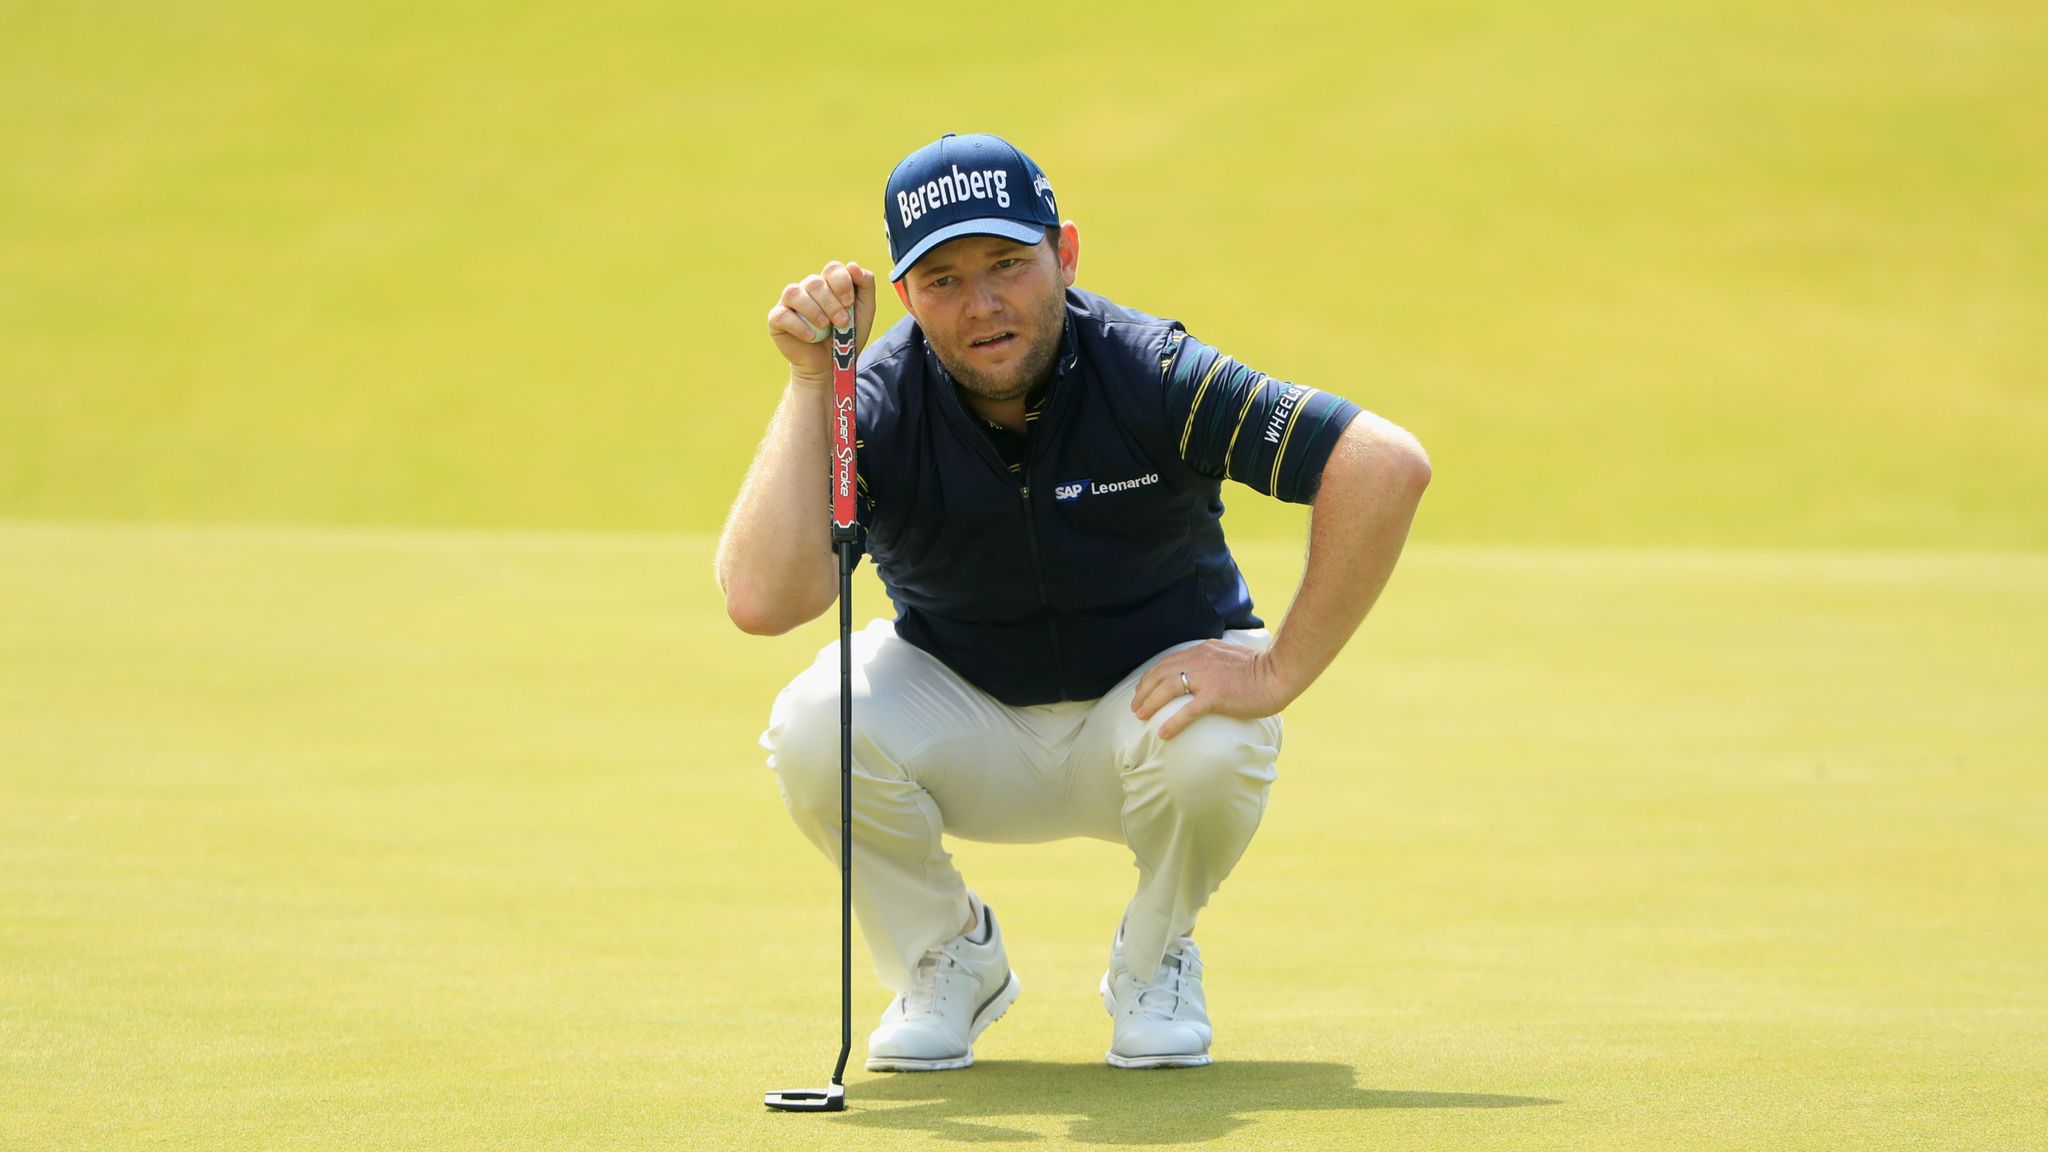 The Open: Branden Grace first man in major history to shoot 62 round